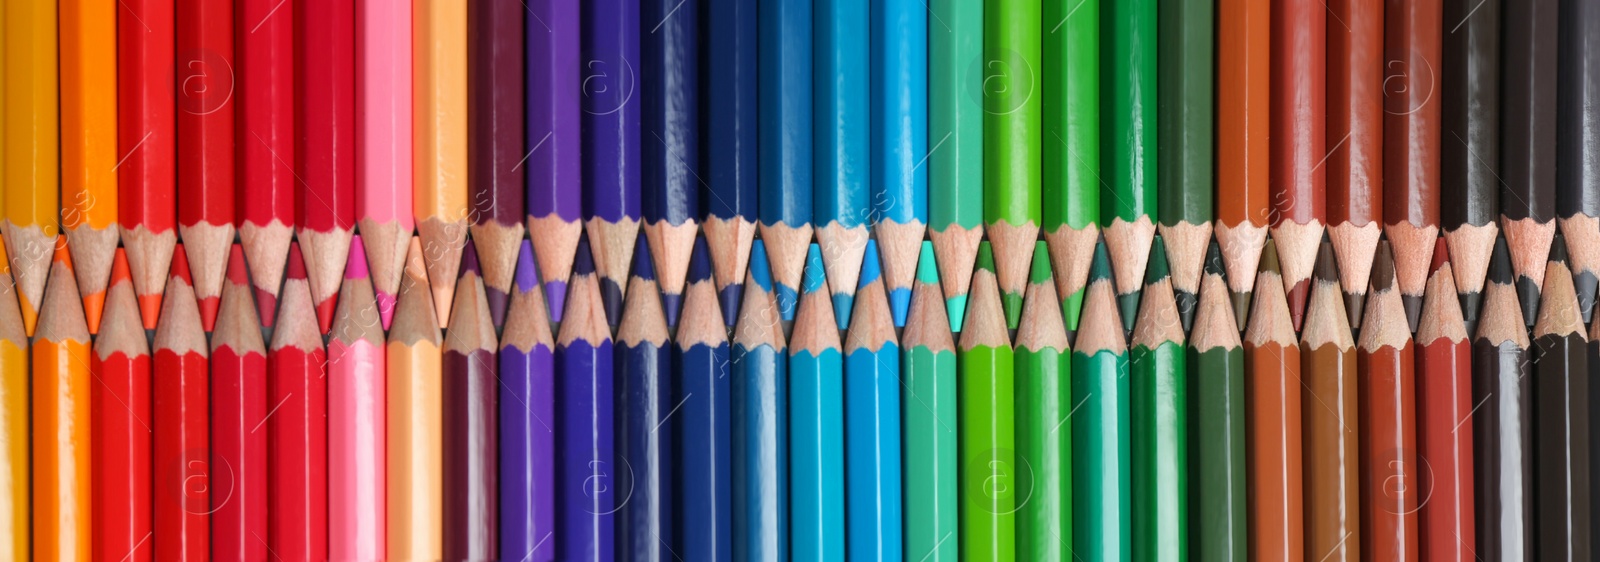 Photo of Set of colorful pencils as background, top view